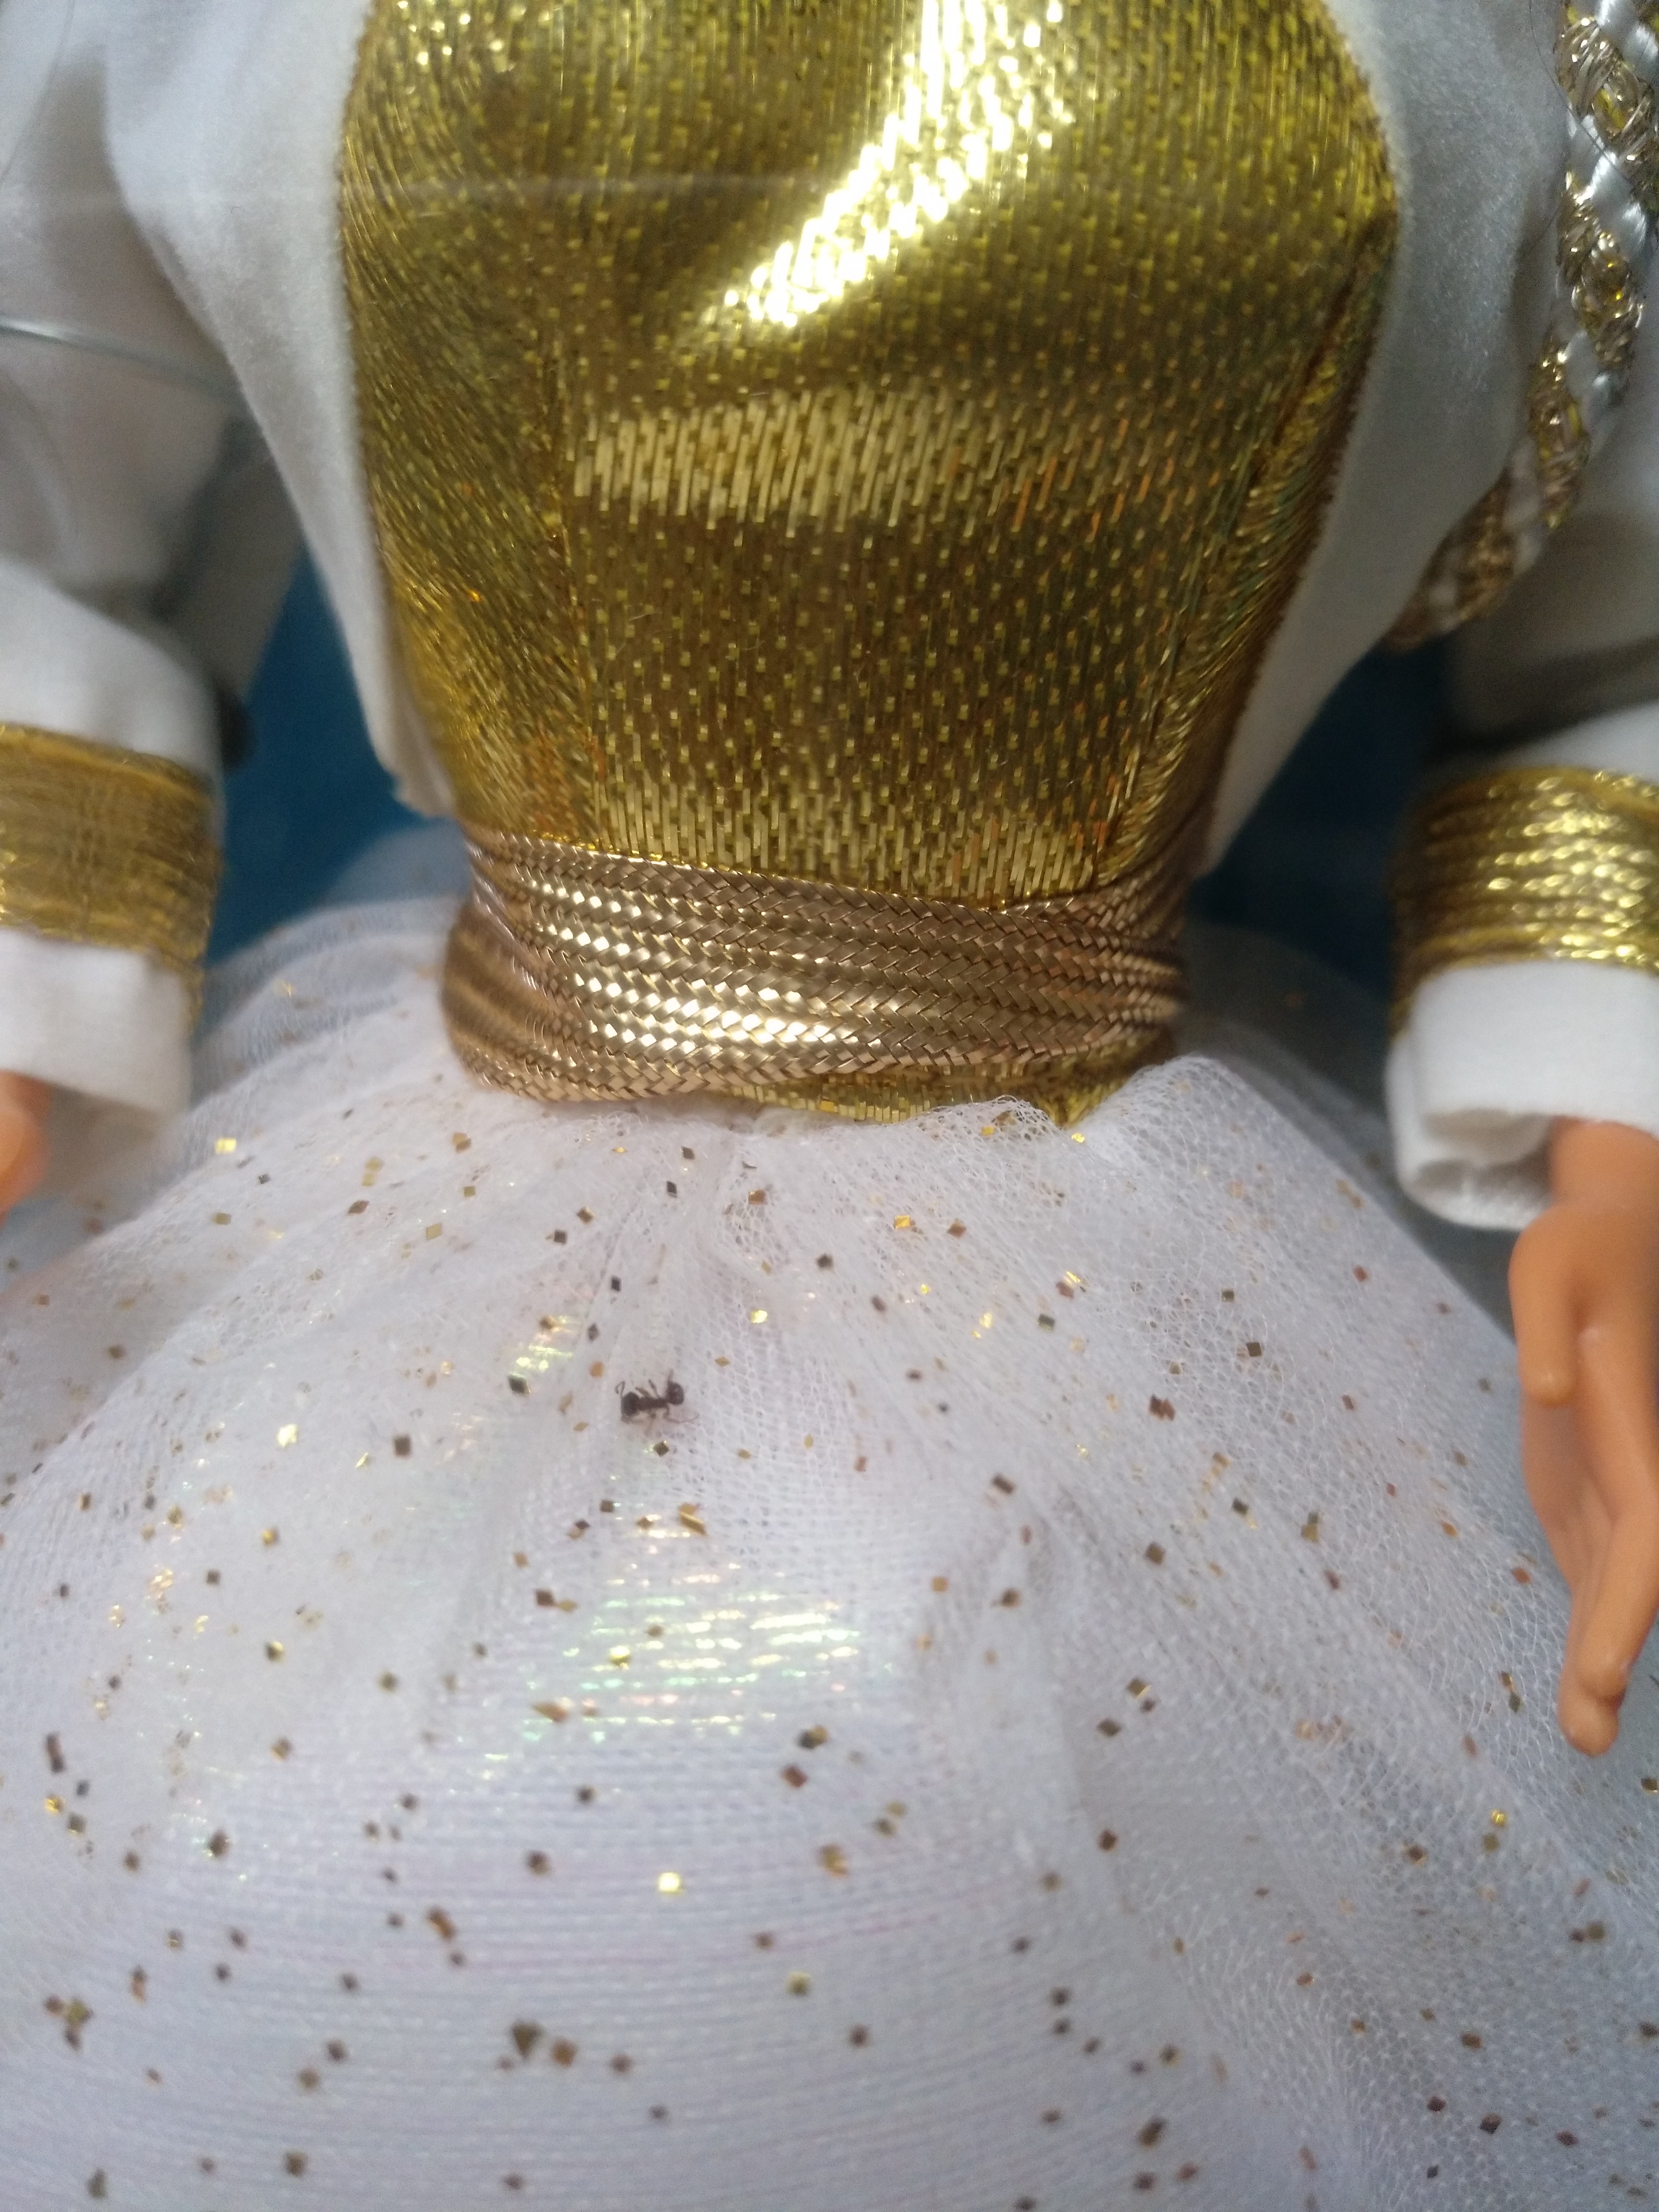 dead ant on doll's dress